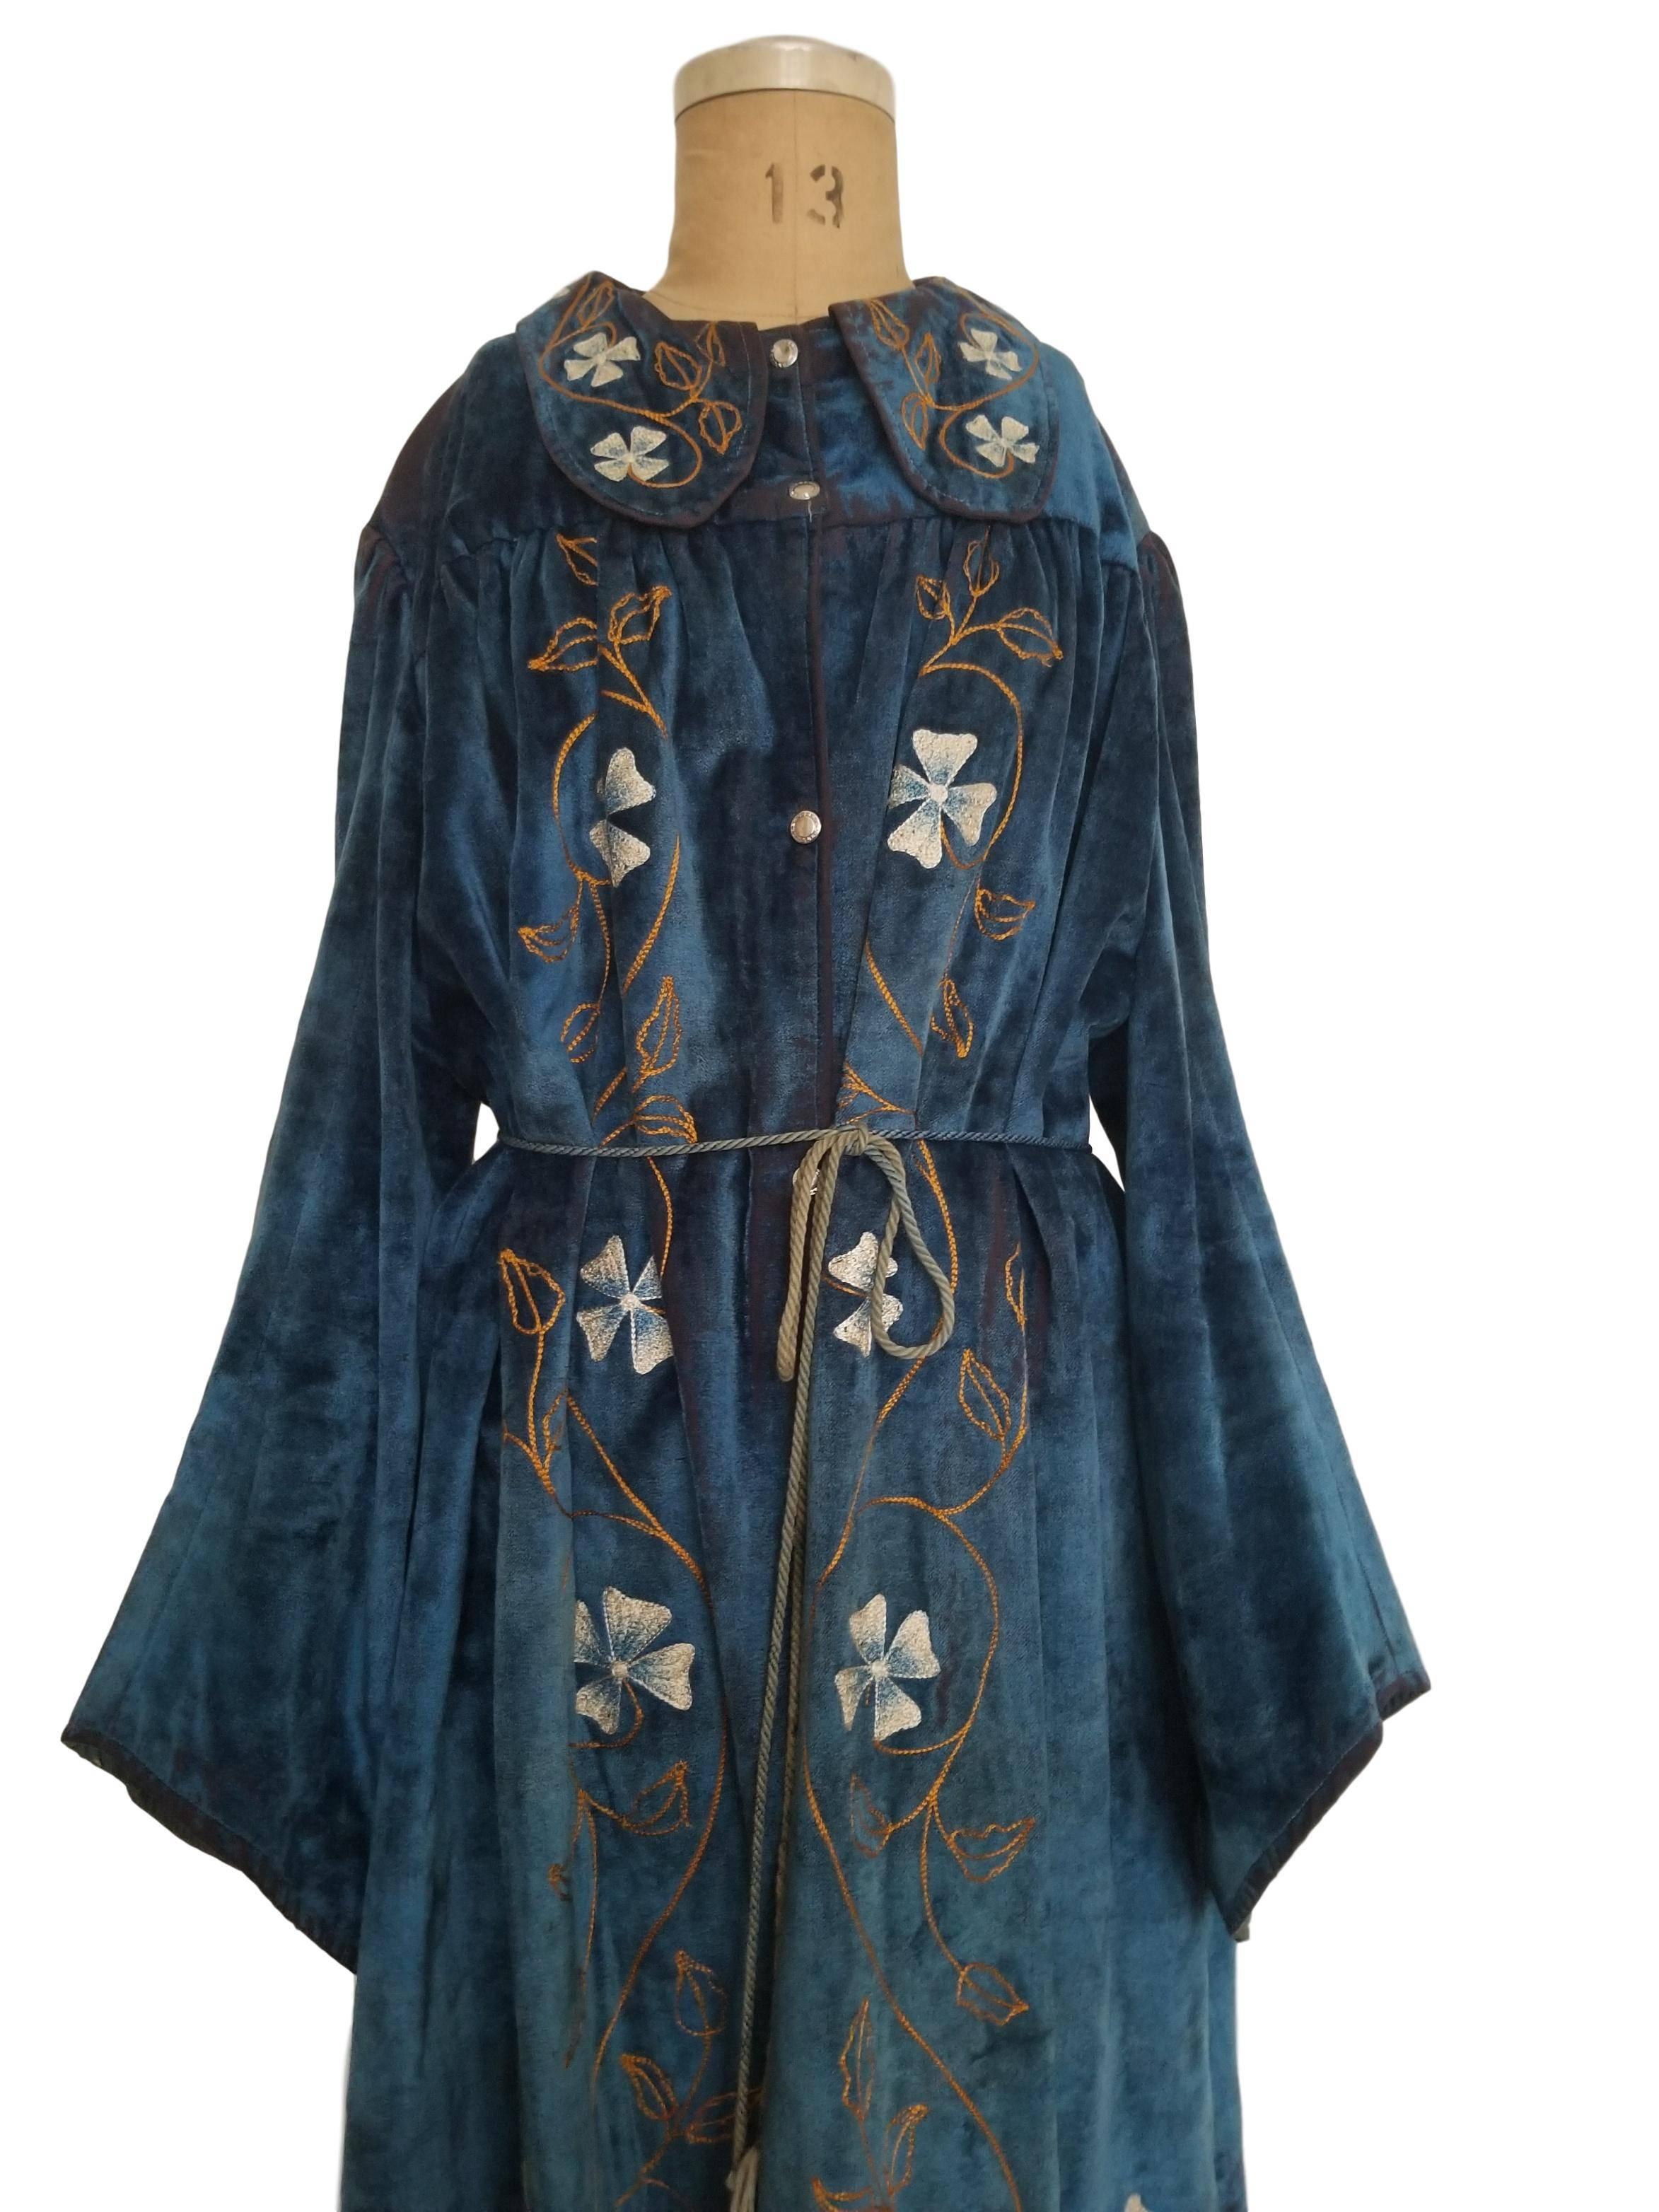 CE Ward Antique Edwardian Velvet Cotton Embroidered Floral Blue Coat Robe Game O In Excellent Condition In Portsmouth, Hampshire